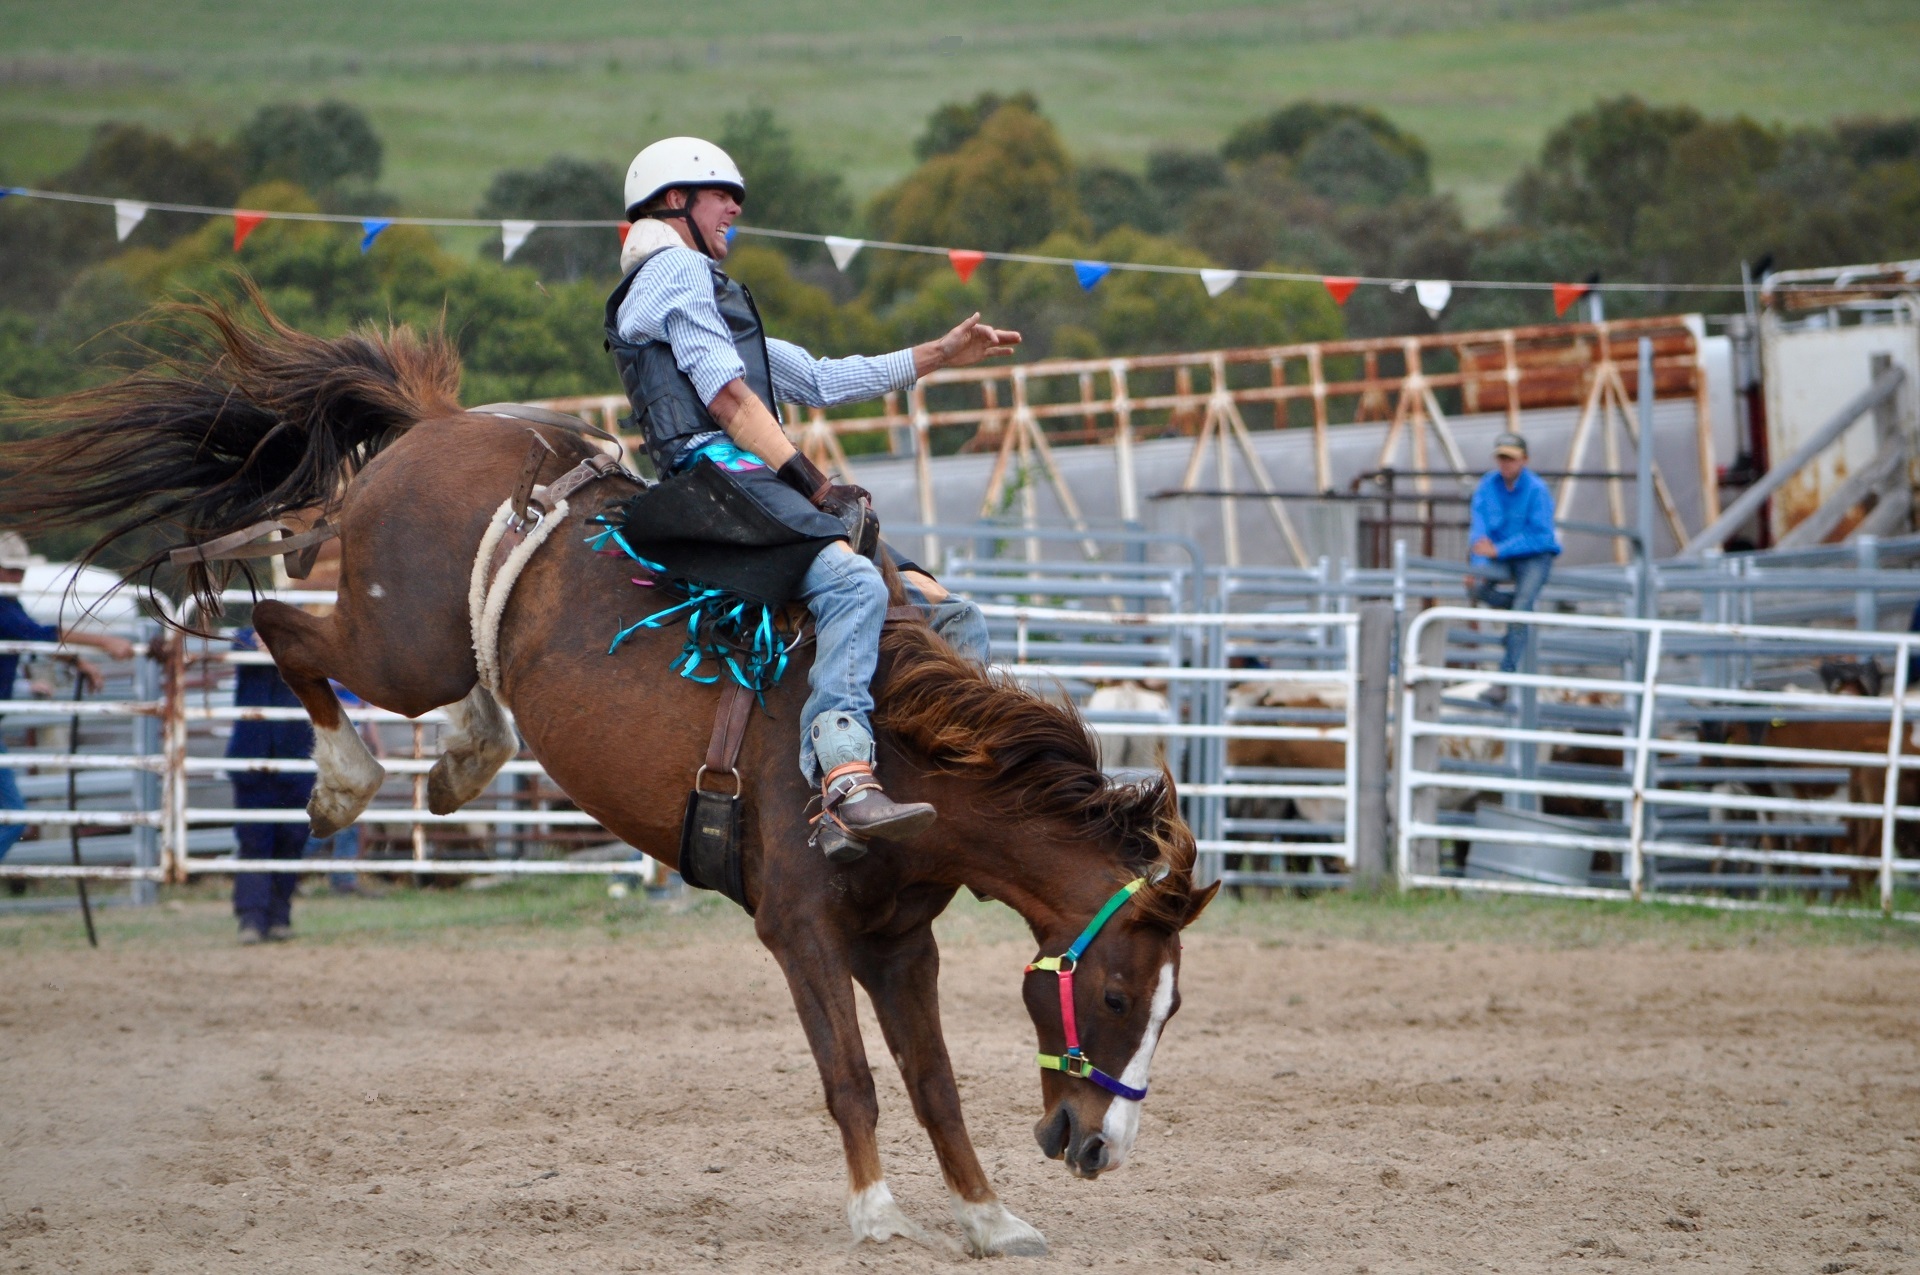 Riding a bucking bronco in a rodeo by skeeze